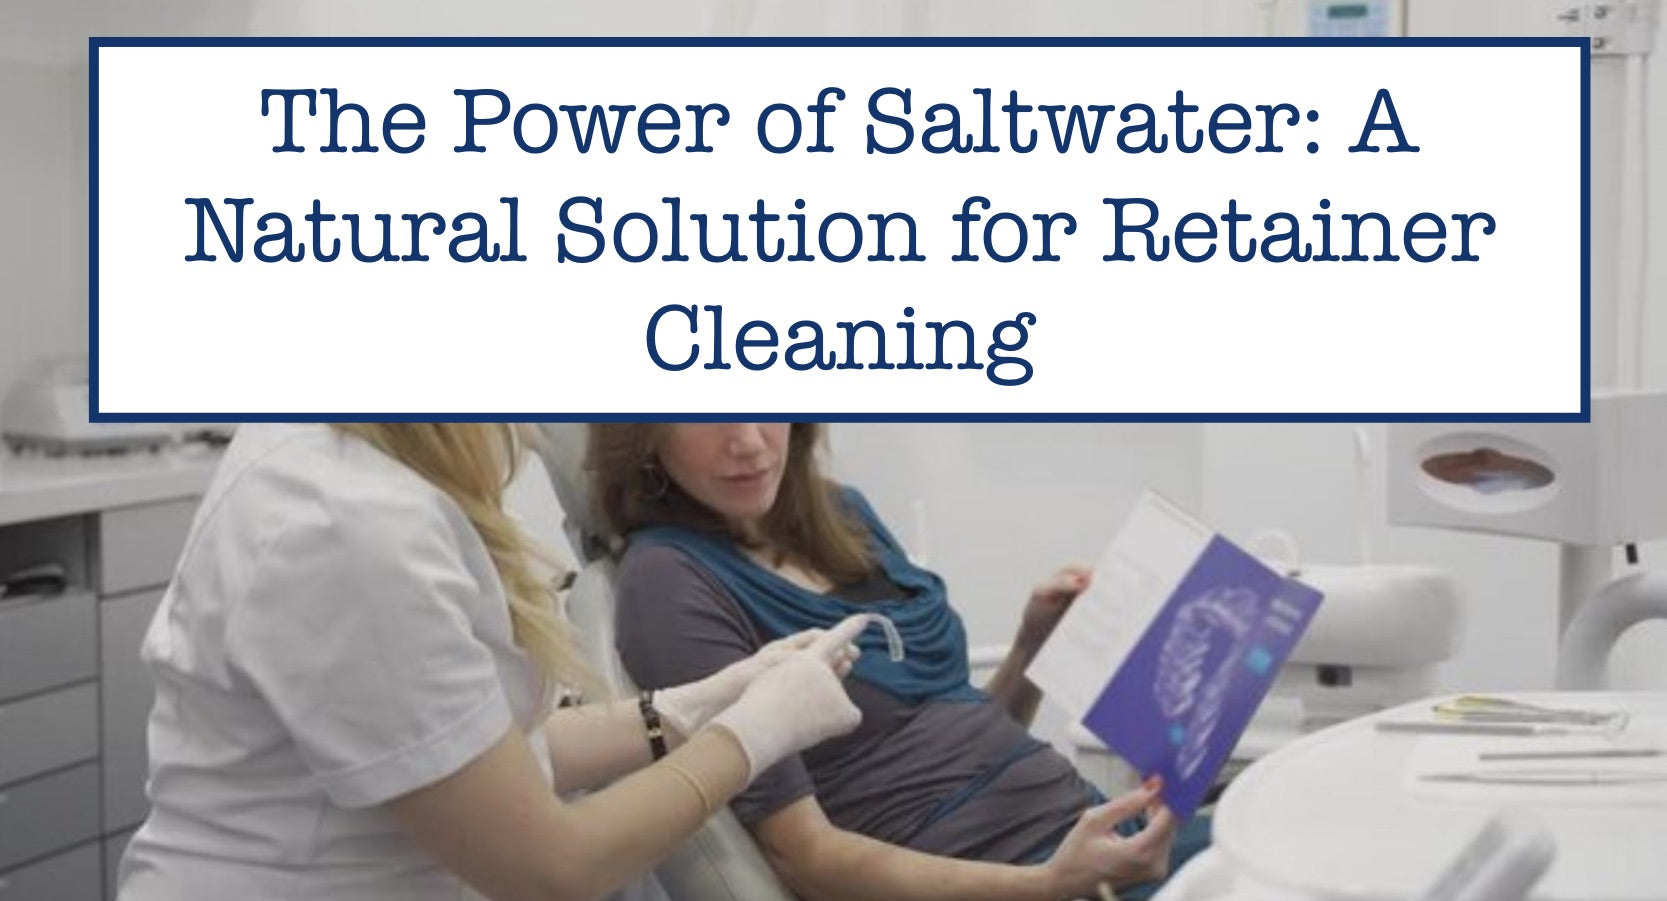 The Power of Saltwater: A Natural Solution for Retainer Cleaning